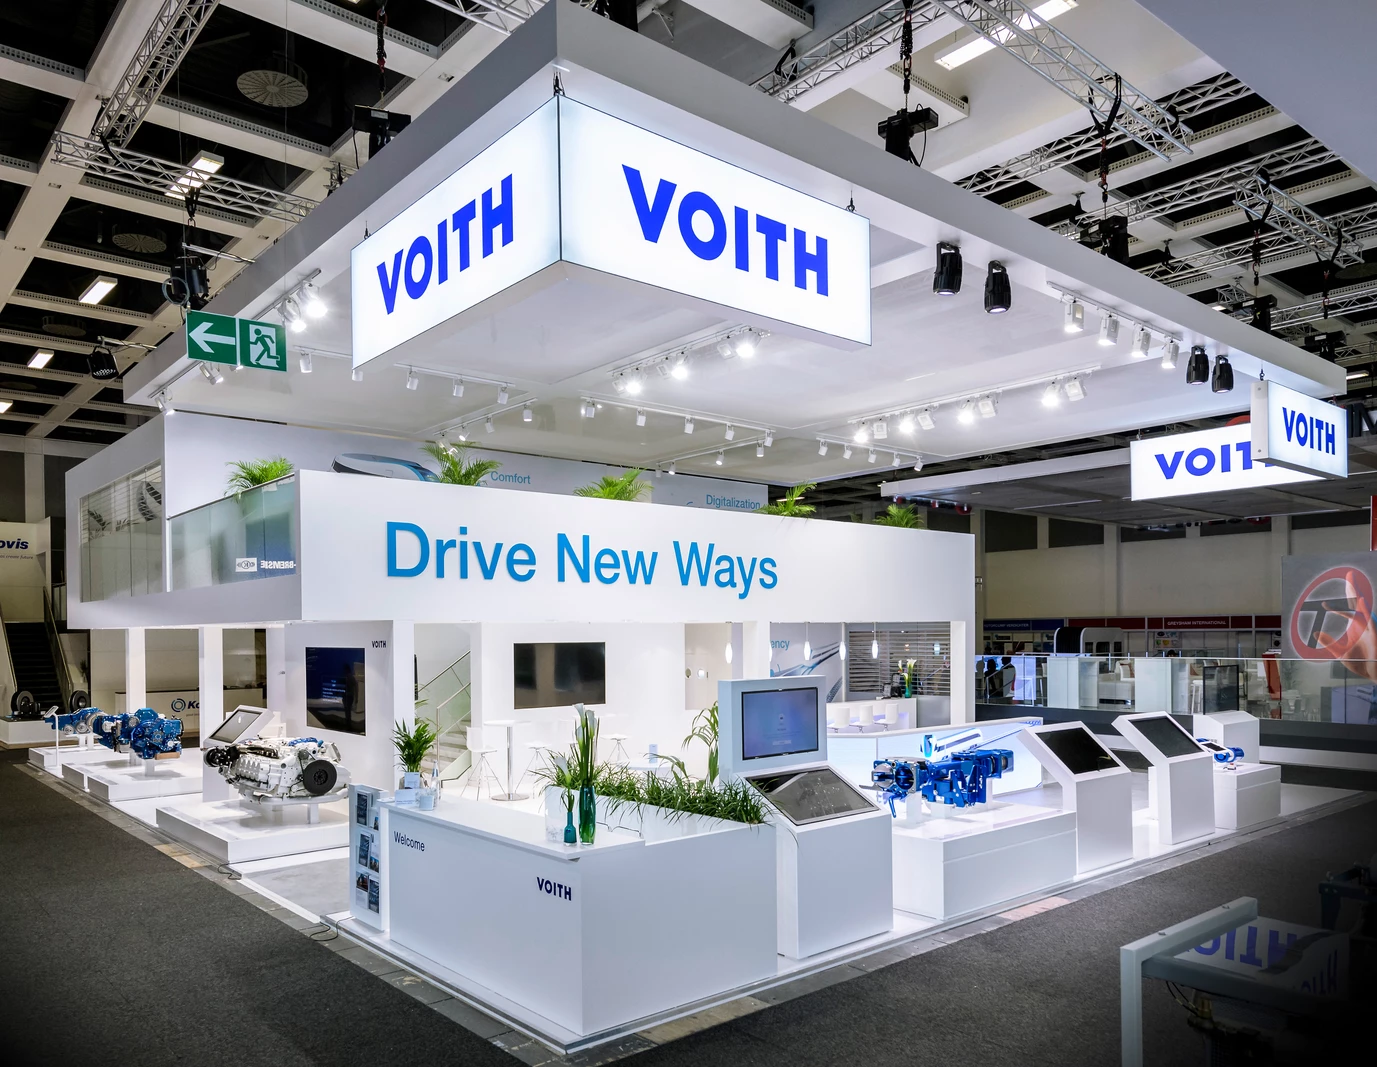 Voith Messestand by SYMA